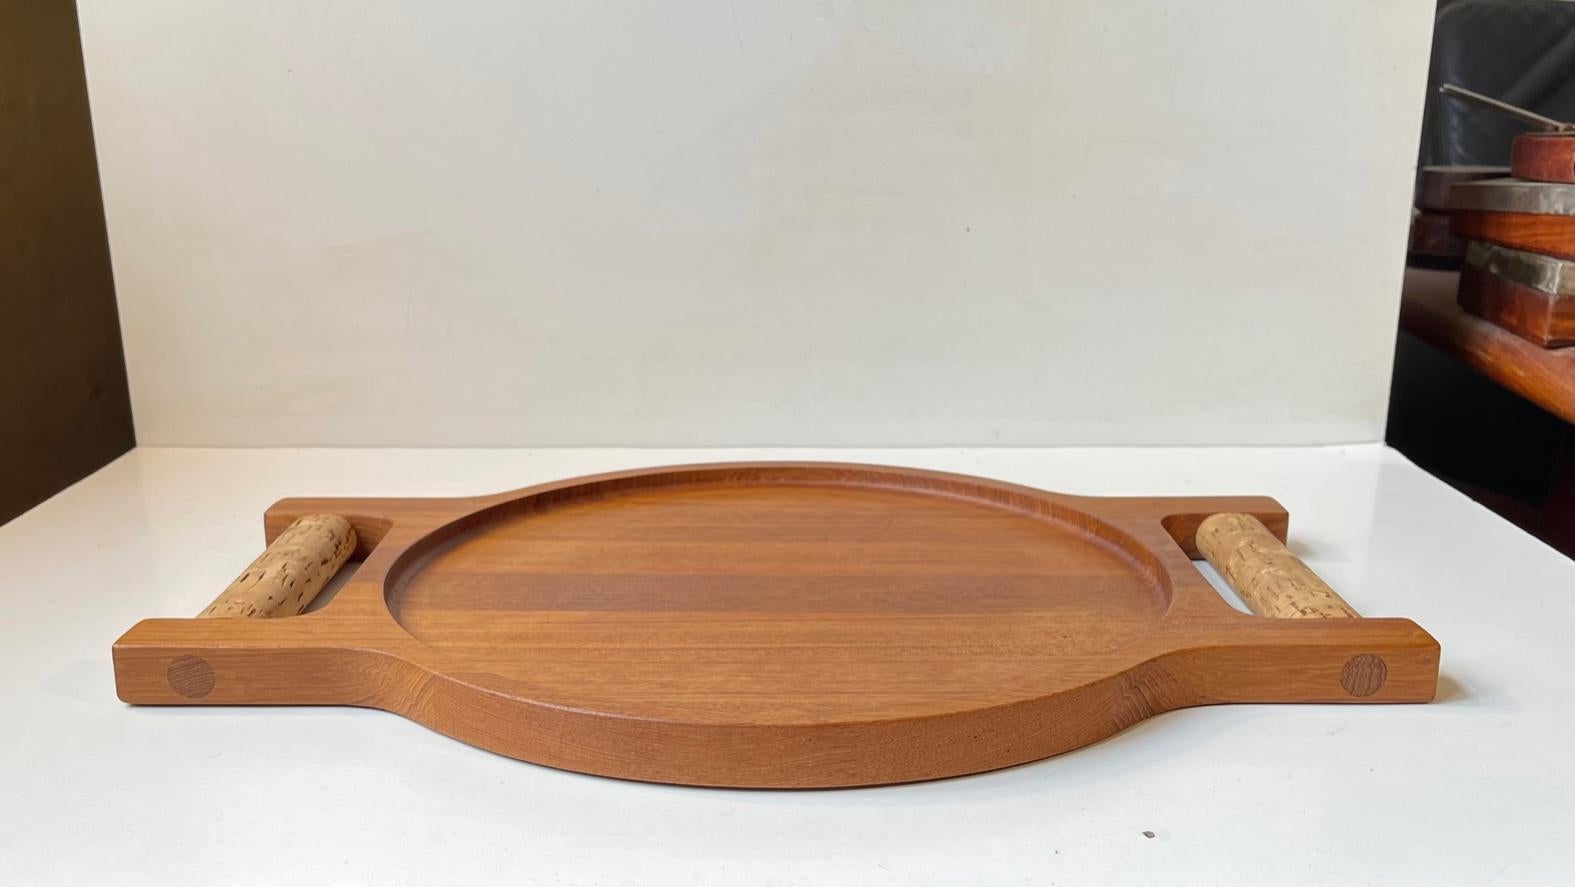 Richard Nissen Danish Modern Double Sided Tray in Teak and Cork, 1960s In Good Condition For Sale In Esbjerg, DK